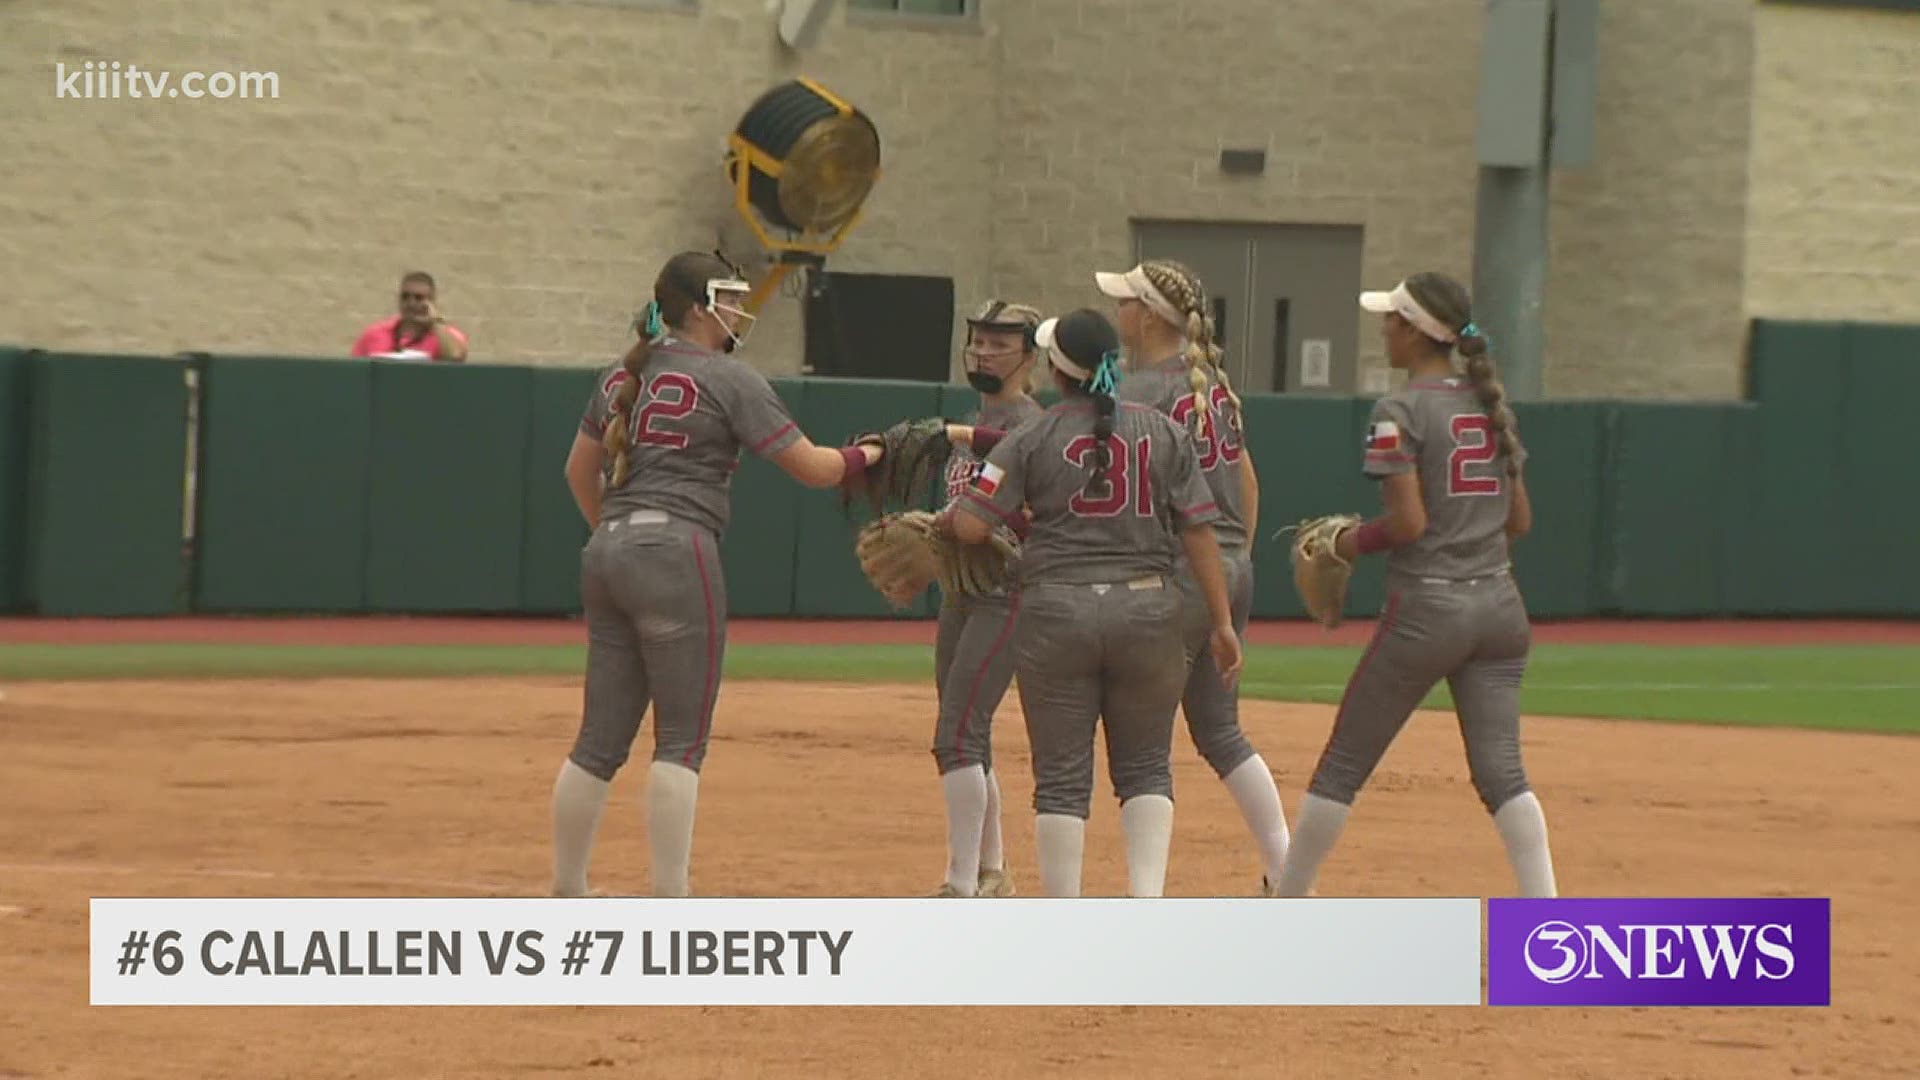 The Calallen Lady Cats took the field against the Liberty Lady Panthers.